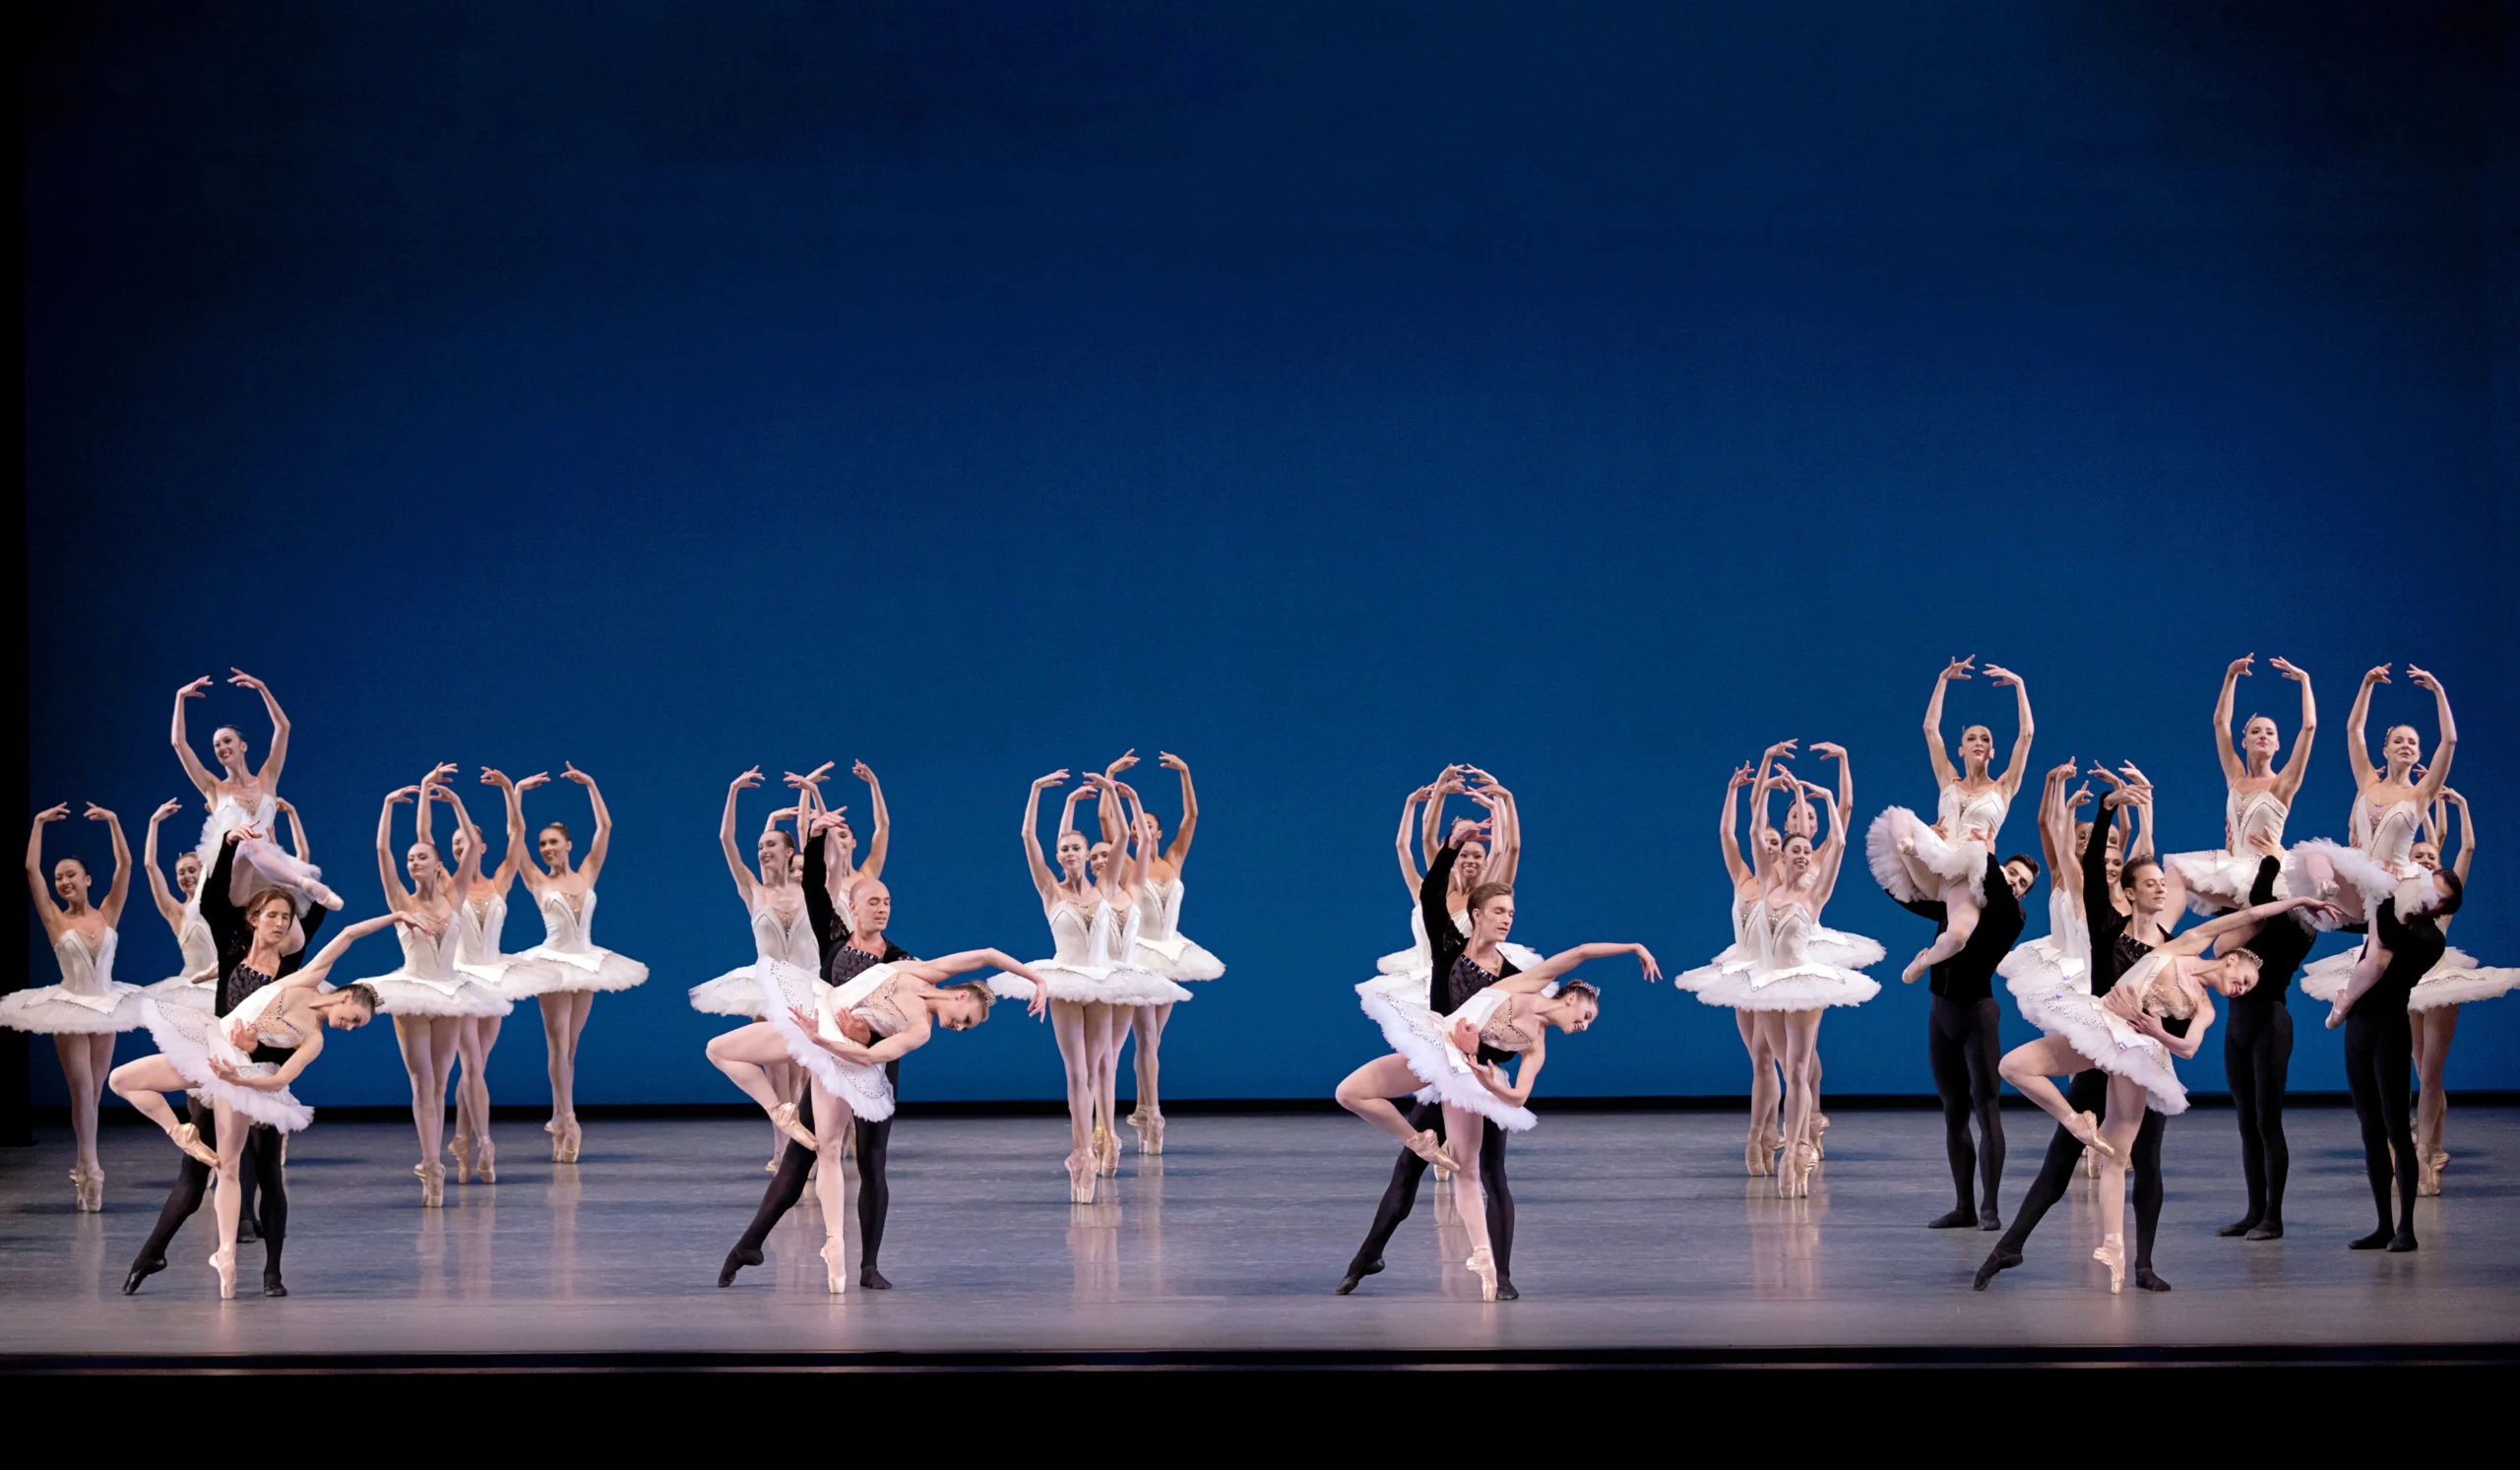 A large ensemble of New York City Ballet dancers poses onstage in "Symphony in C." In the front line, five pairs of male and female partners pose together, and behind them two lines of corps de ballet women post in sous-sus. The women wear white tutus, and the men wear black tights and tunics.